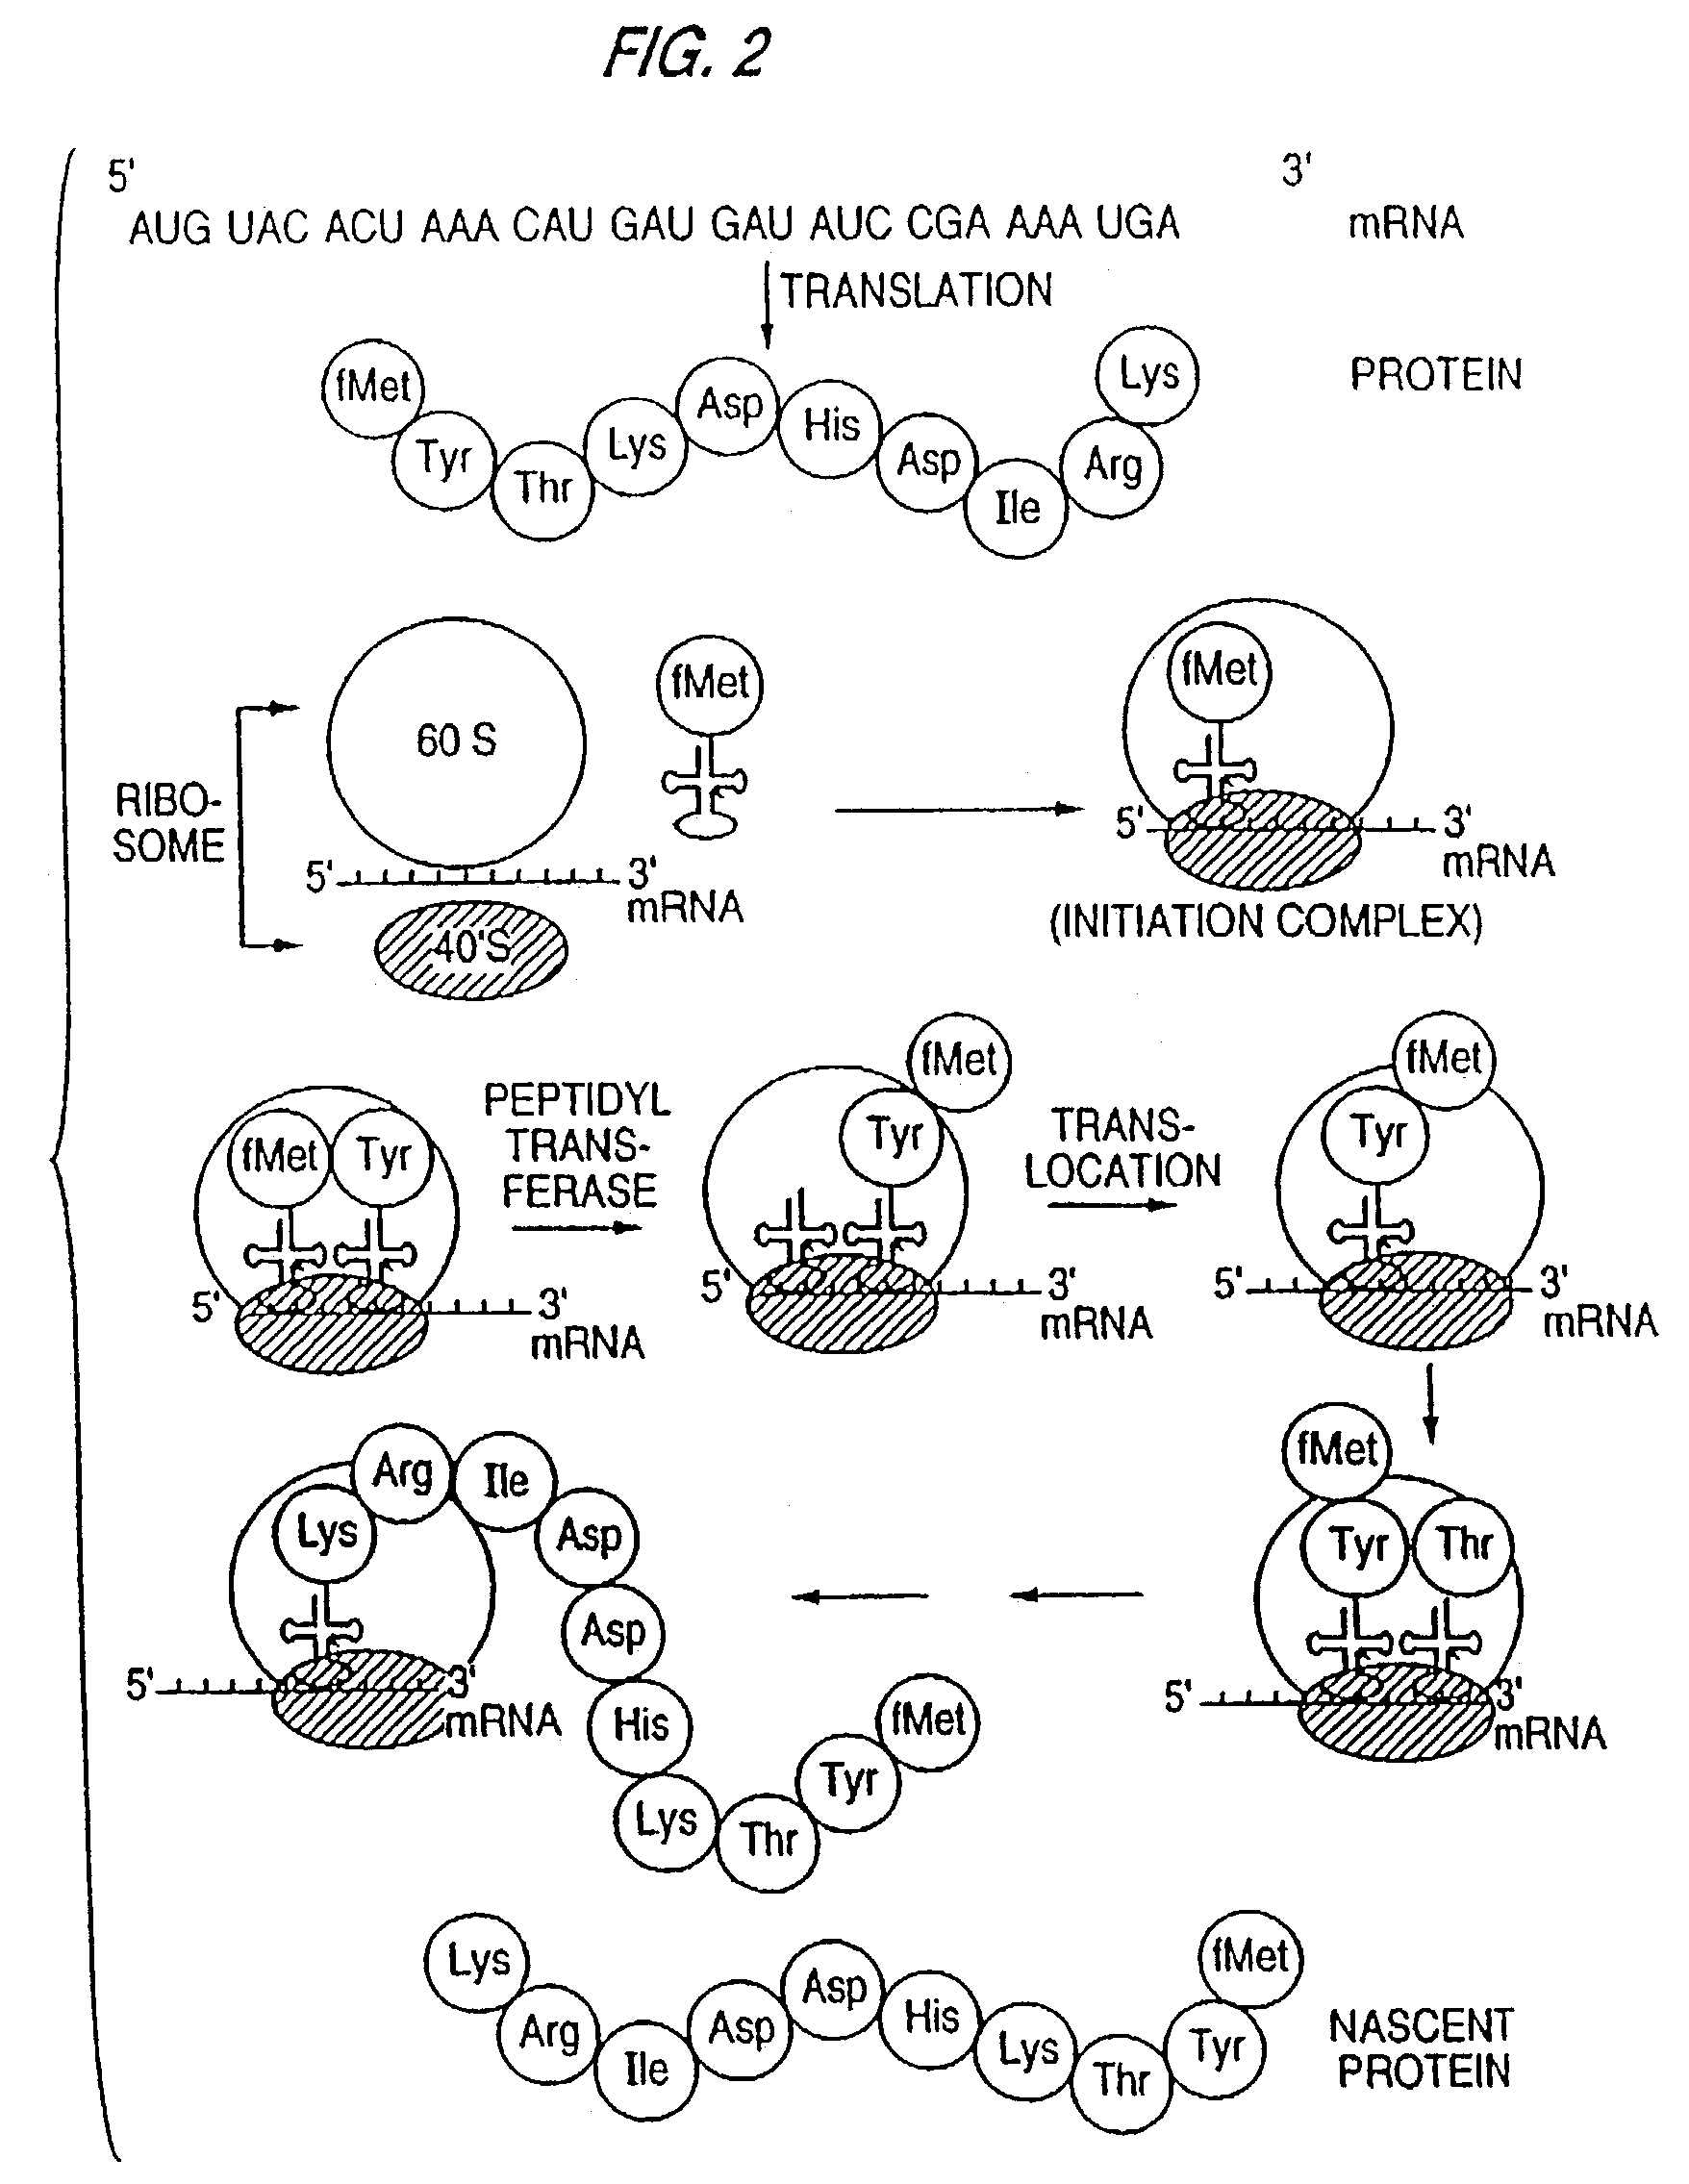 Methods for the detection, analysis and isolation of nascent proteins